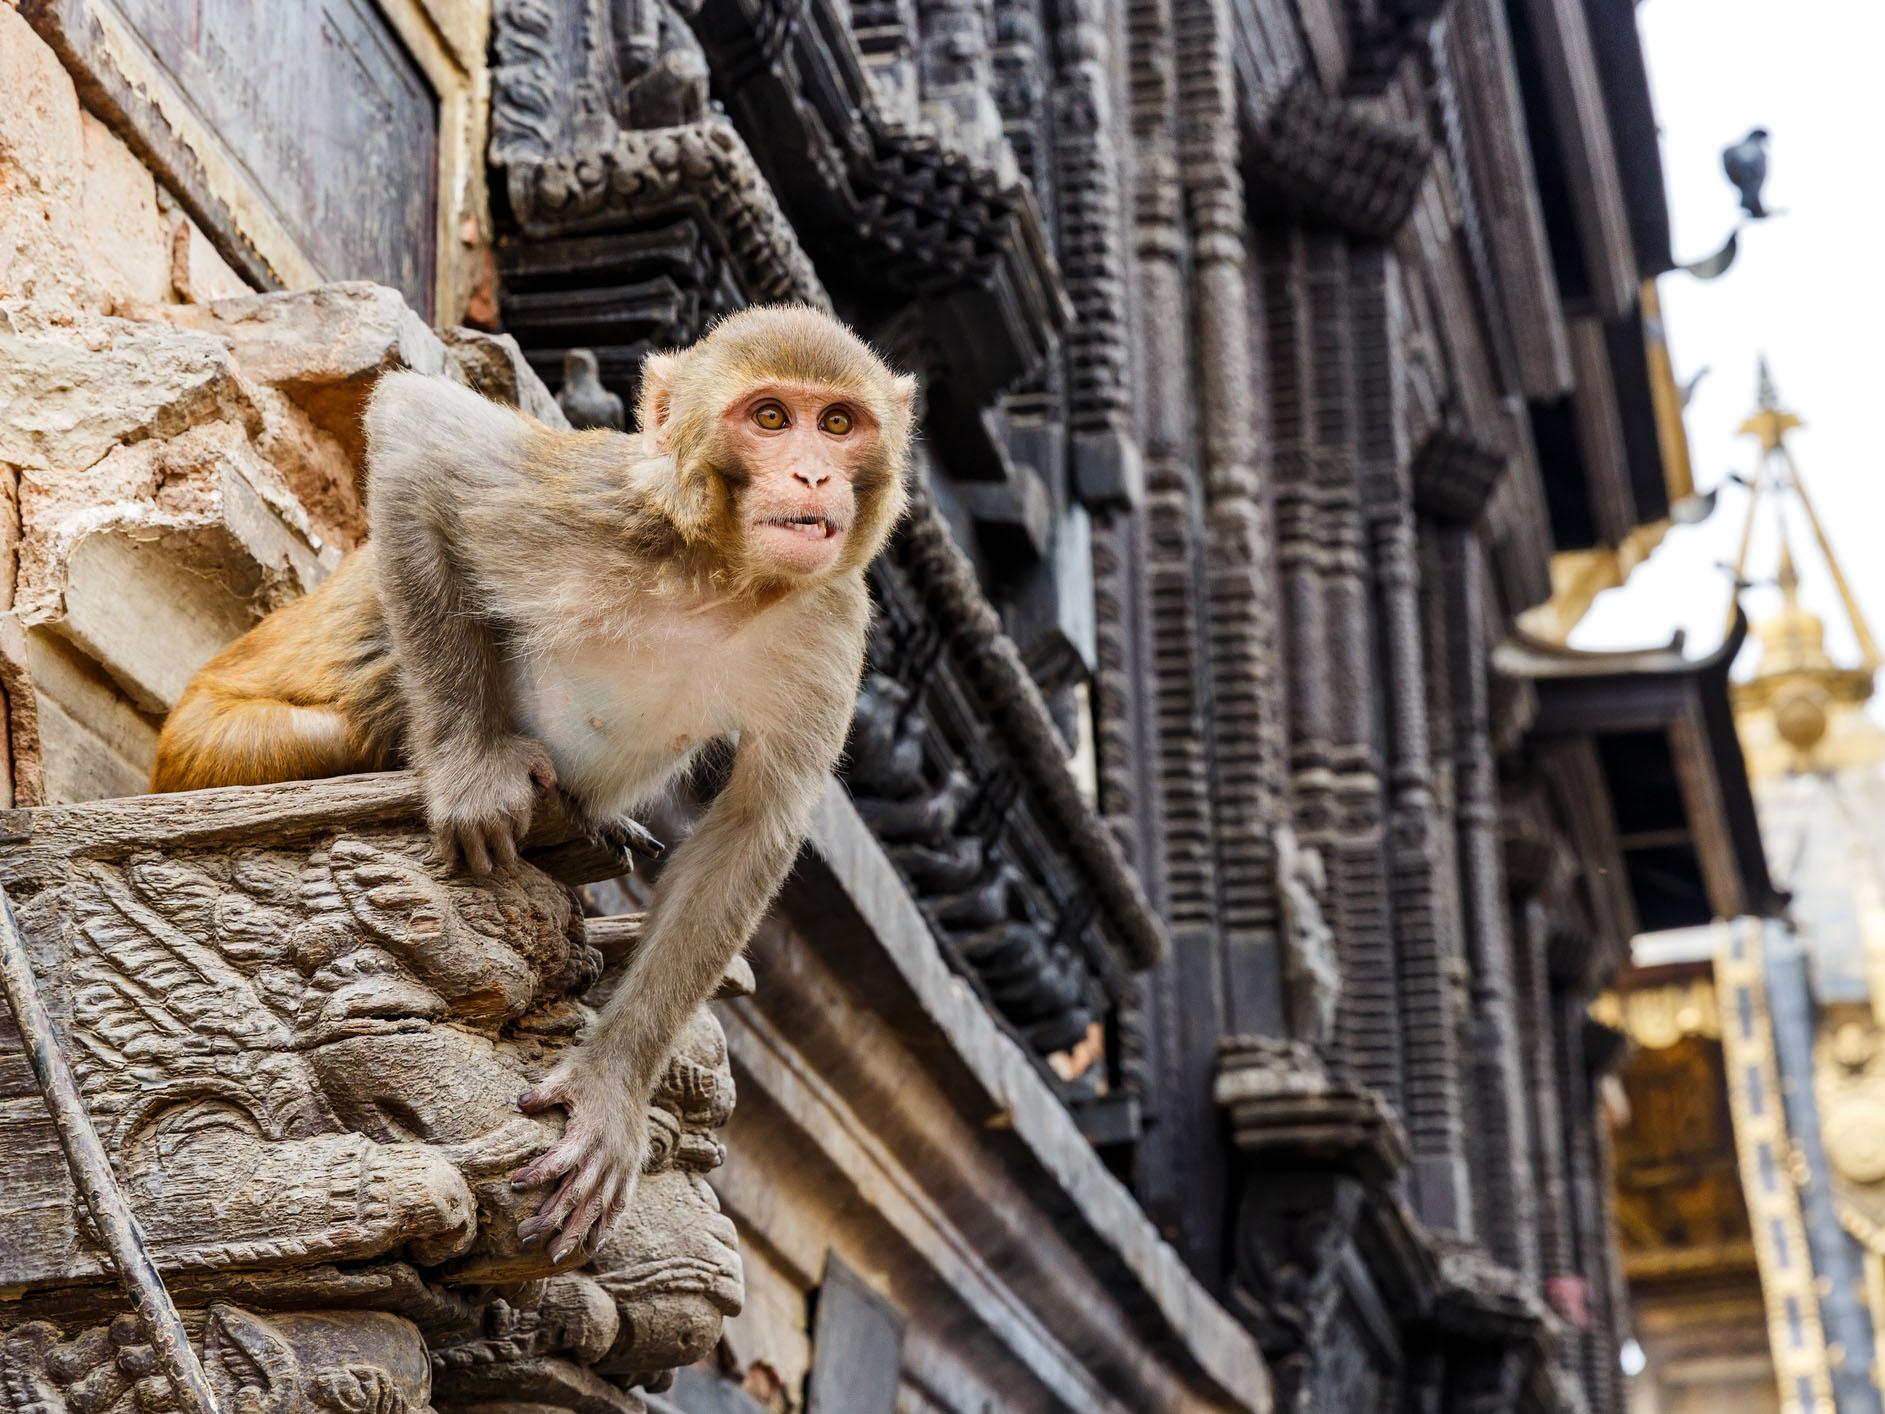 A Rhesus monkey has been identified as the likely species that attacked the baby